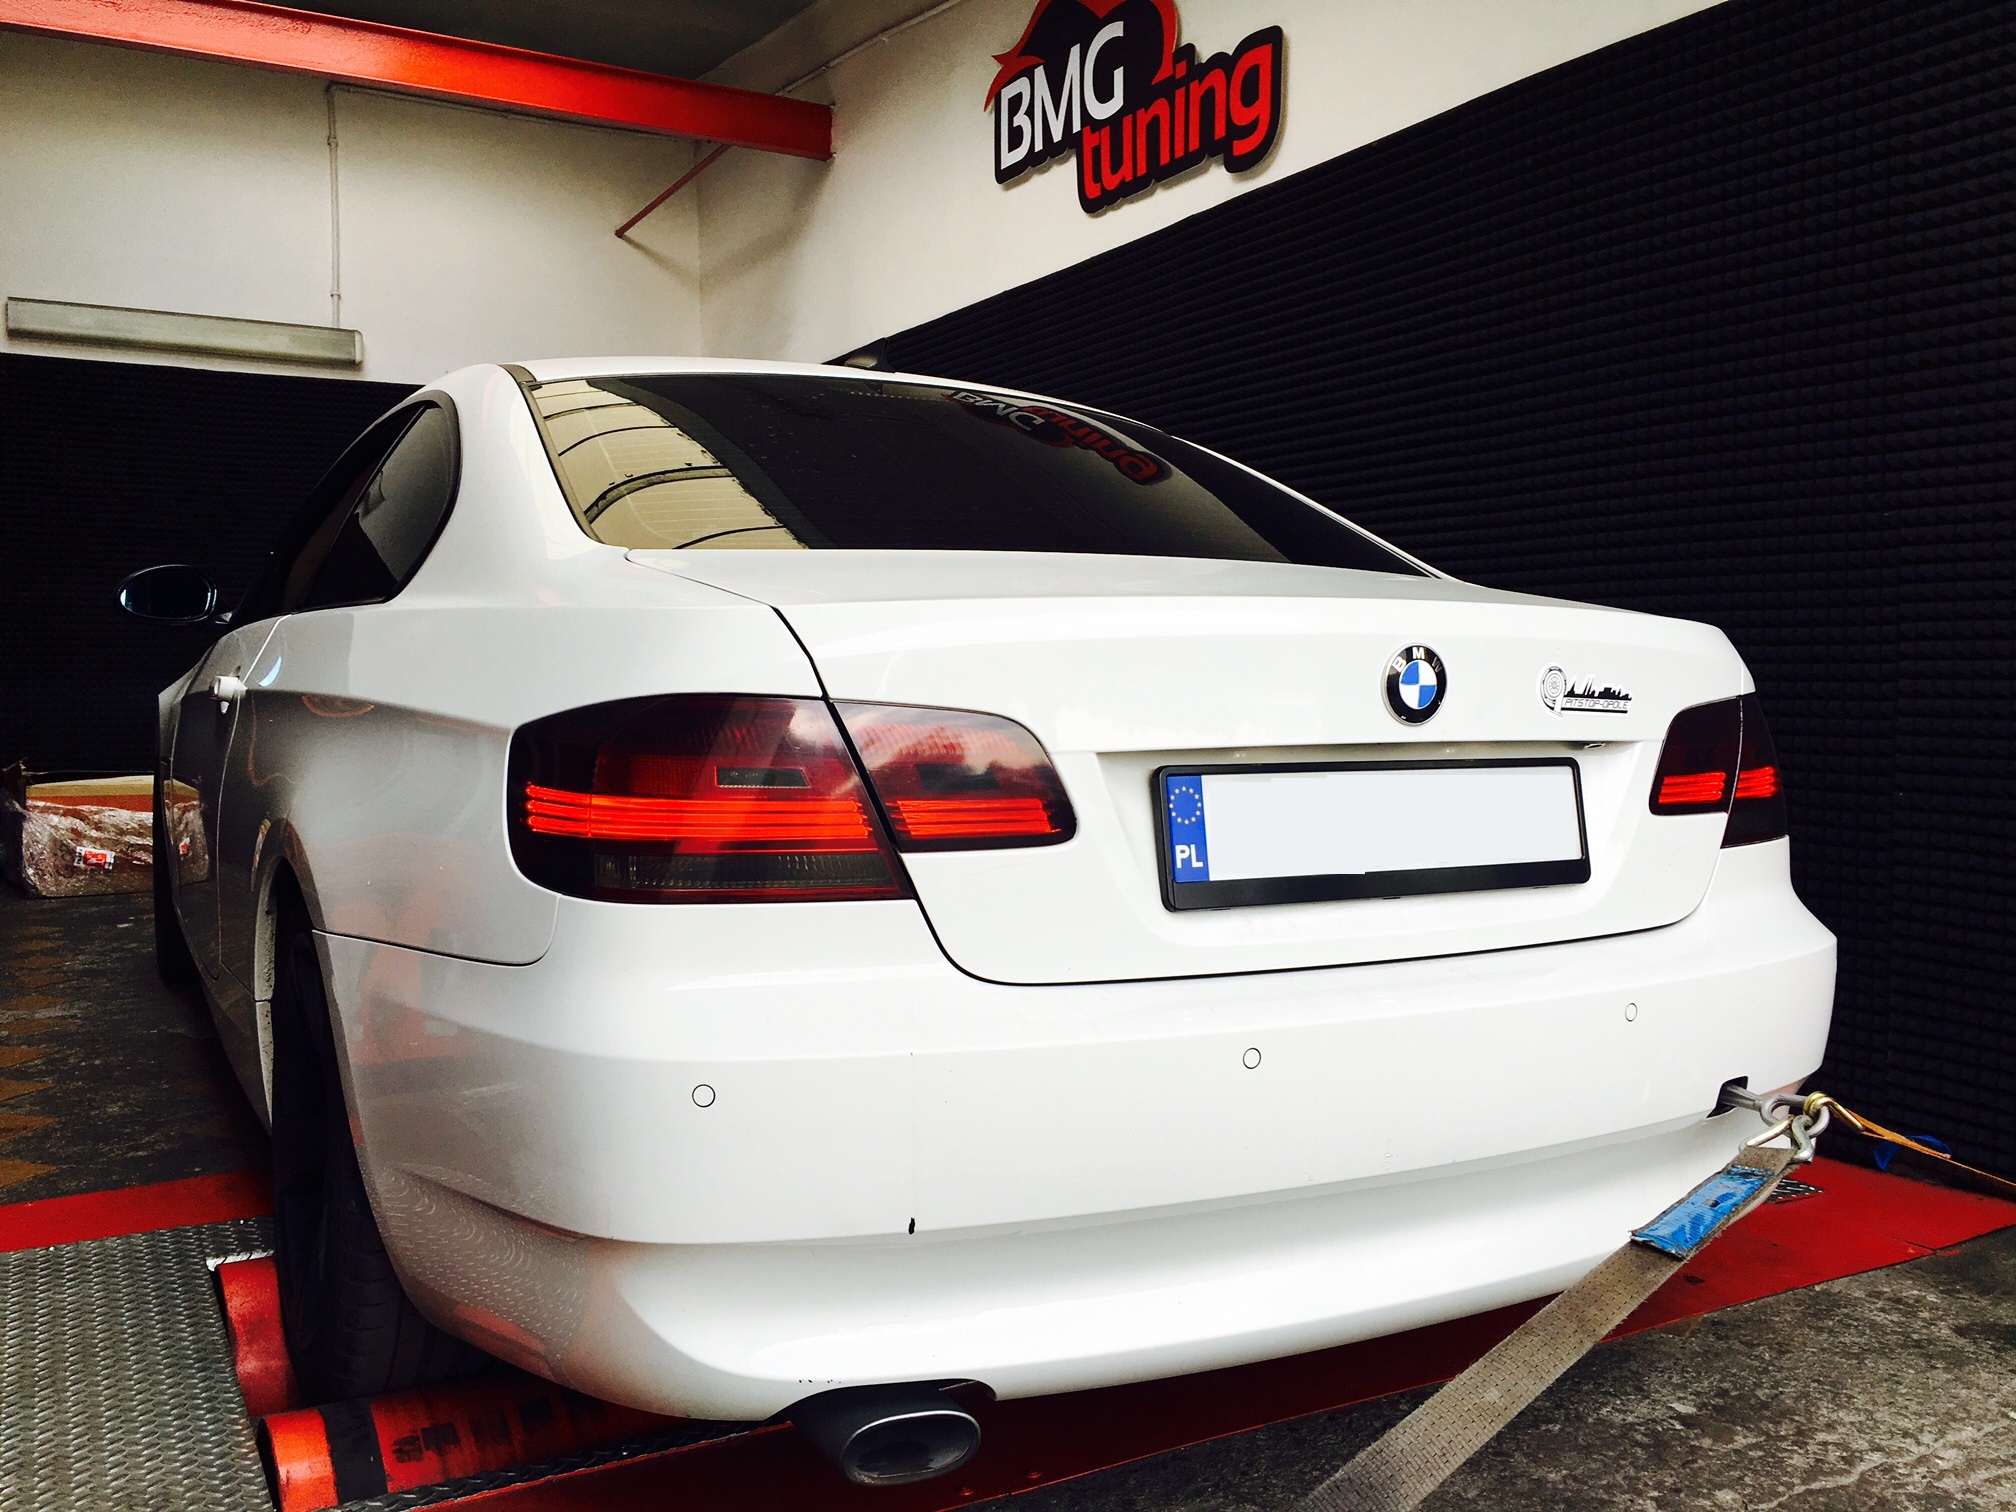 BMW e92 320d 177KM chiptuning + DPF OFF BMG Tuning